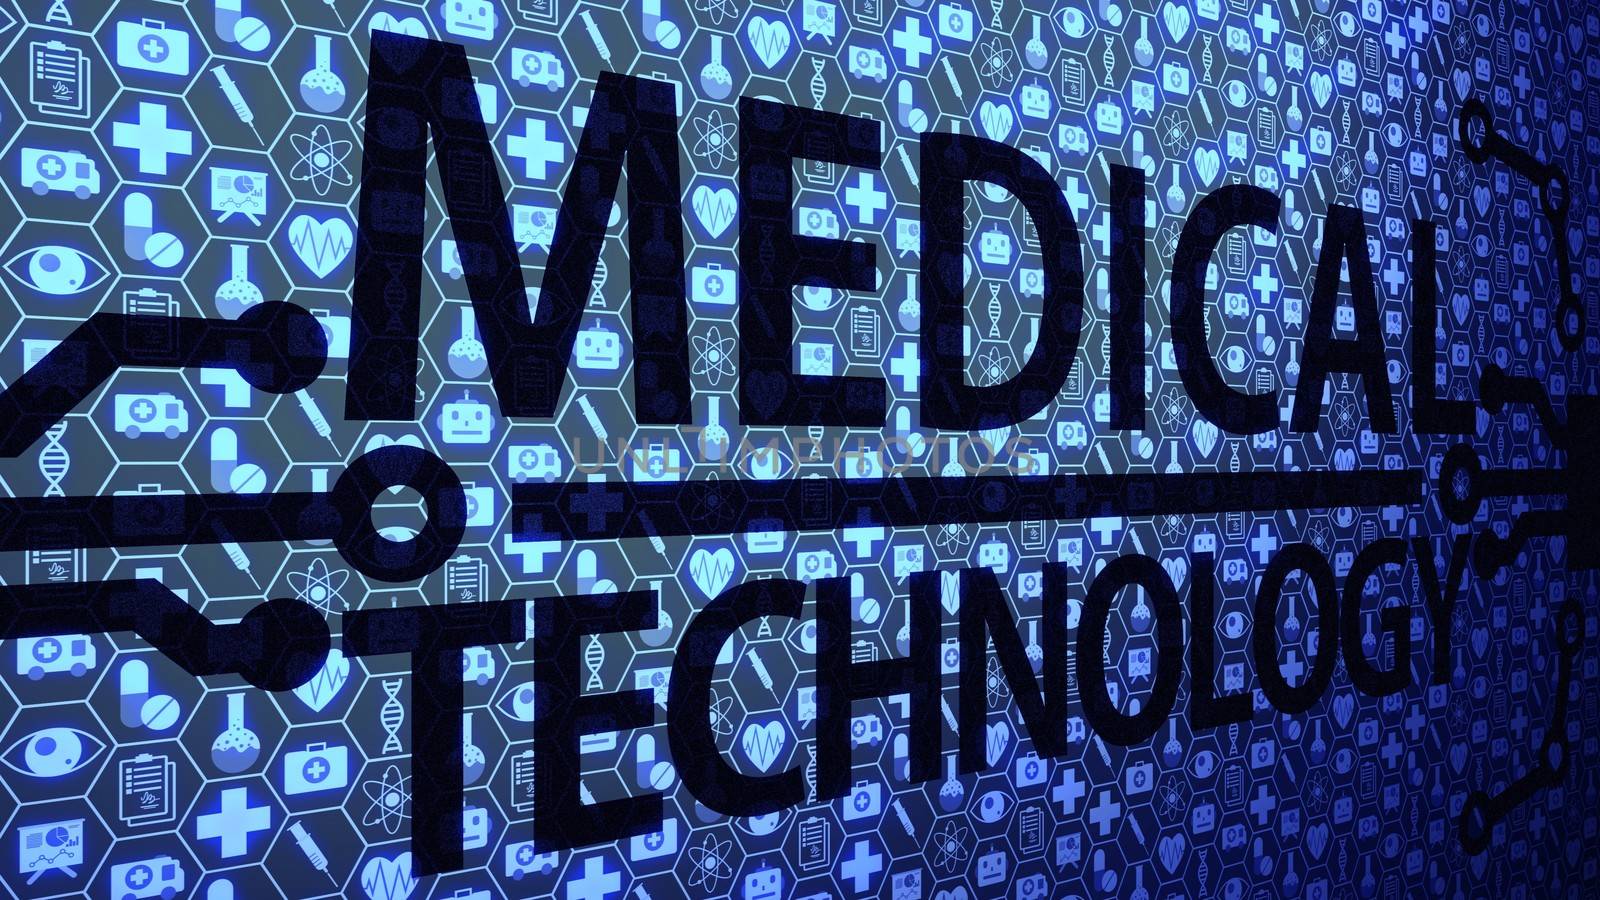 Medical Technology Big Picture Background HUD Composed of Icons Set with Blue Light Ver.3 of 4 (Different Angle)